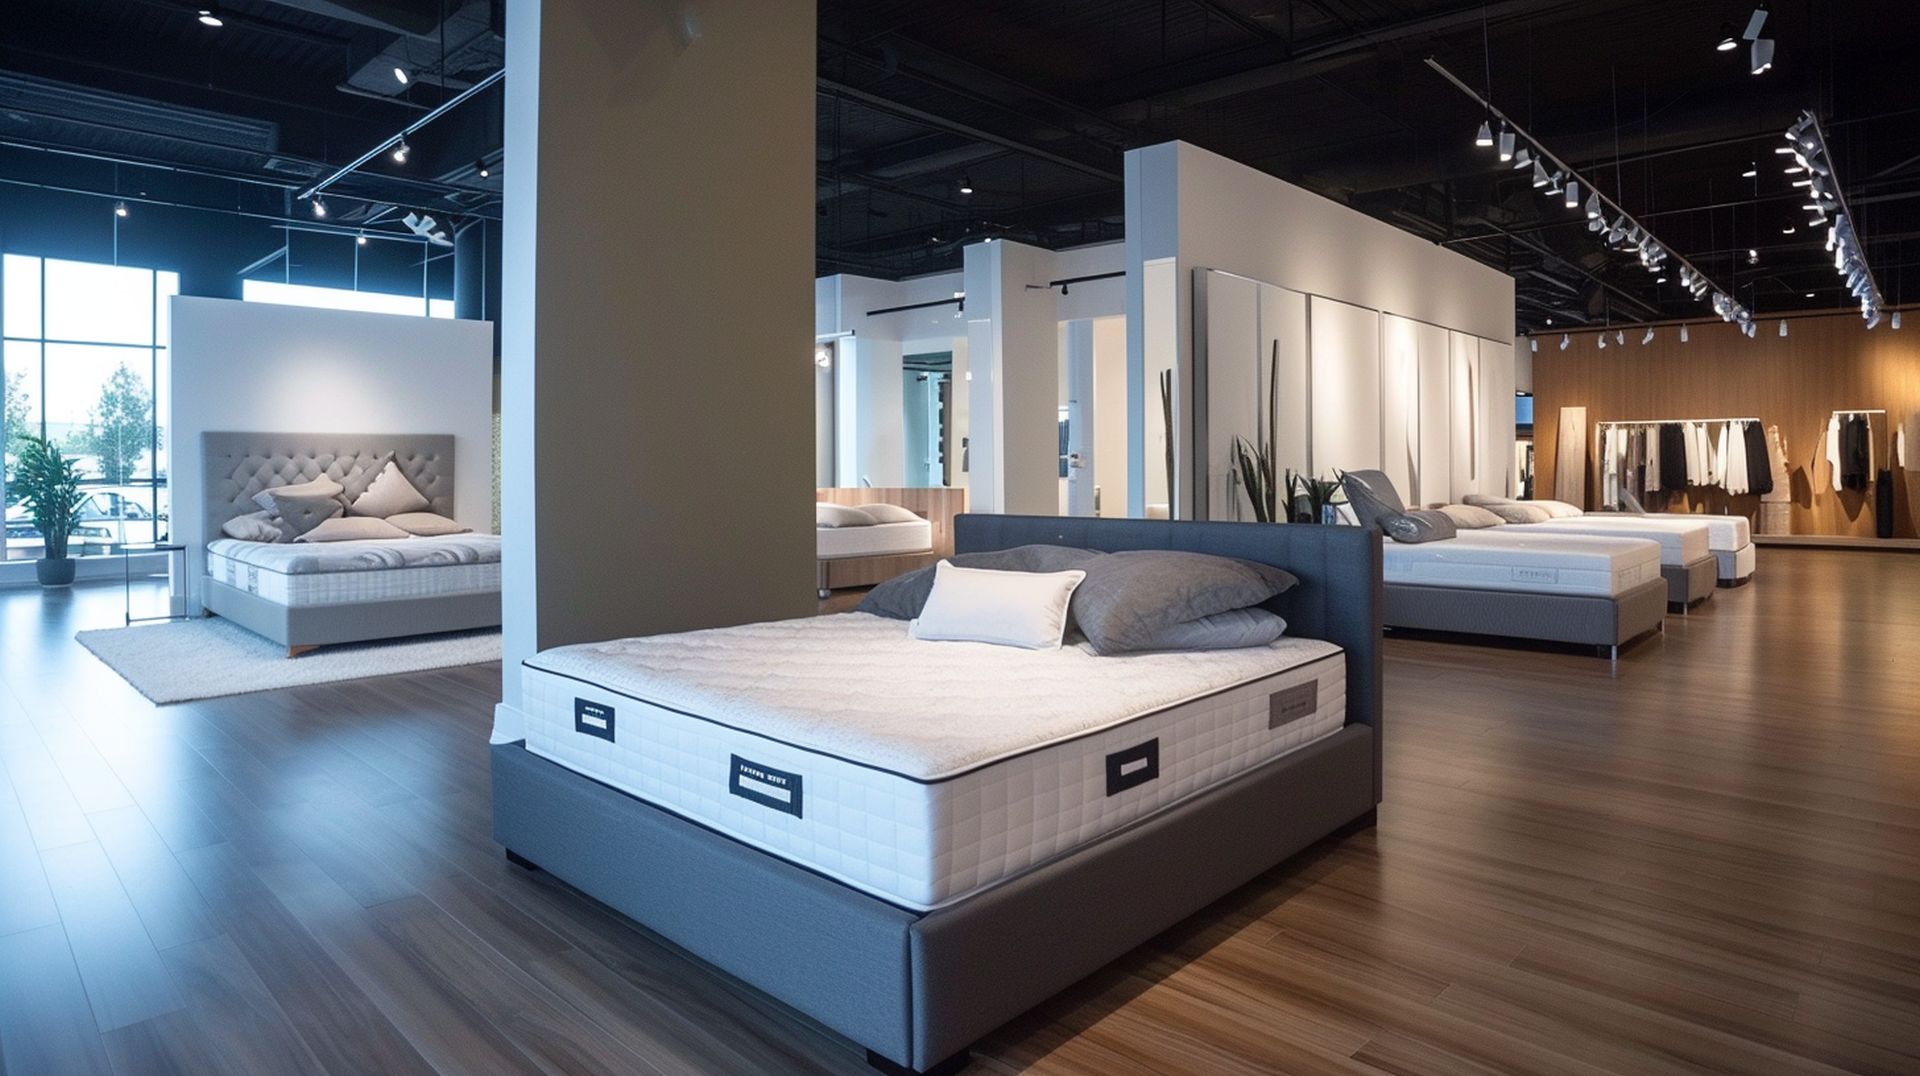 If you're looking for a new bed, mattress stores in Quincy offer the best customer and delivery service, financing, and warranties in Massachusetts